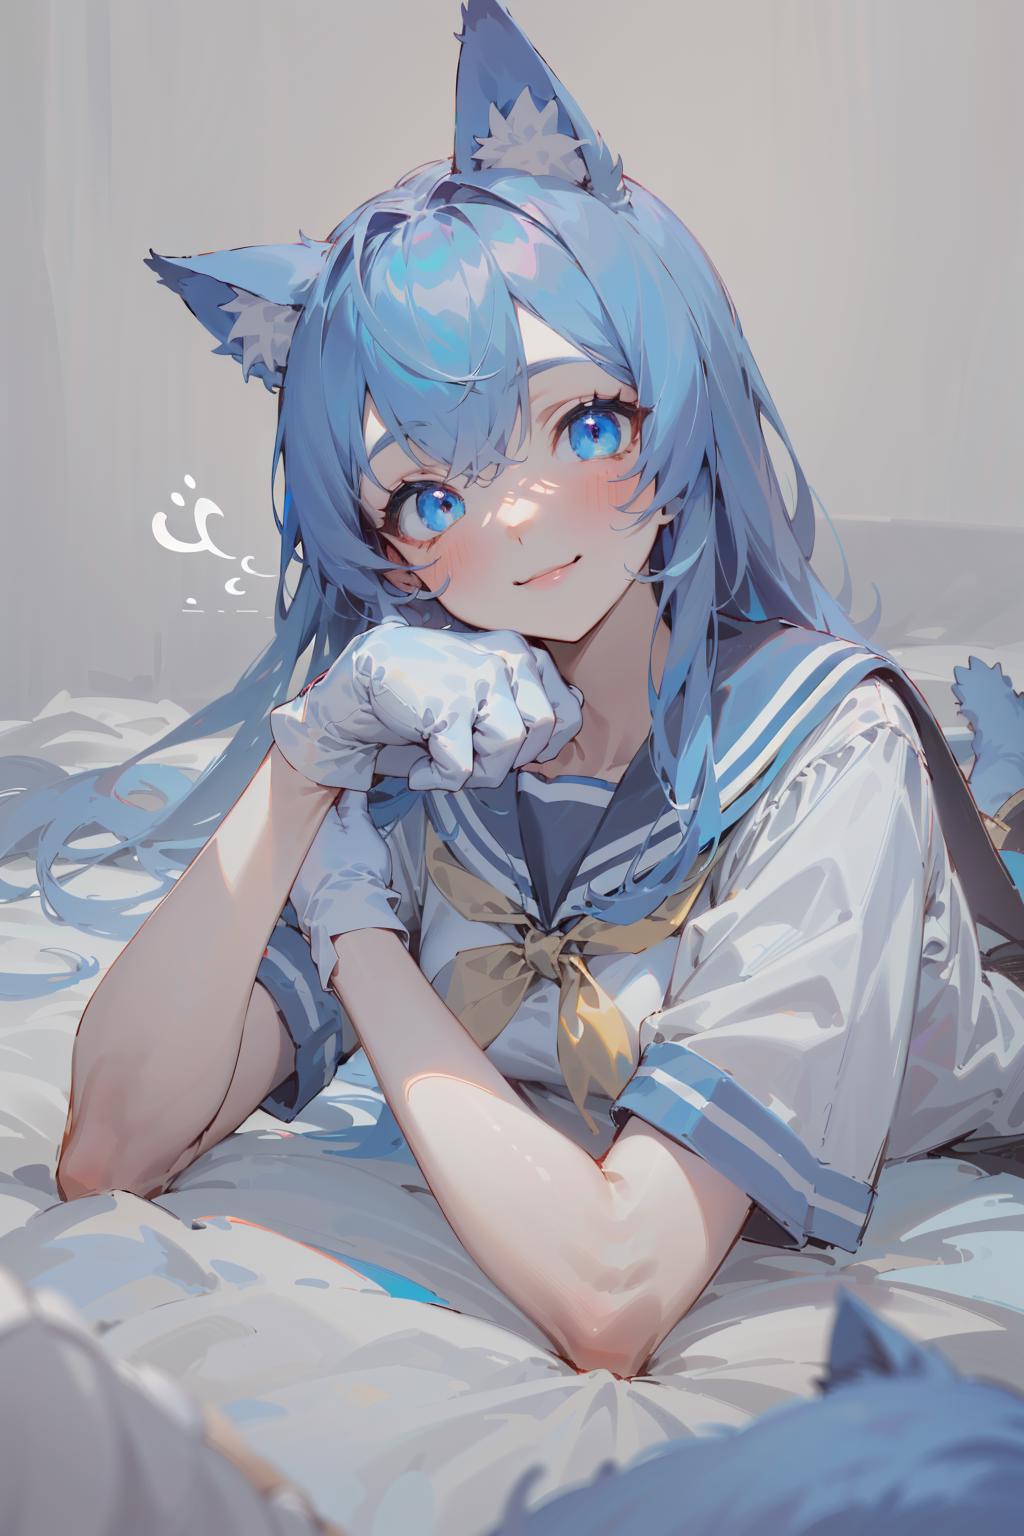 A cartoon drawing of a blue haired girl with cat ears and a yellow bow, posing on a bed.